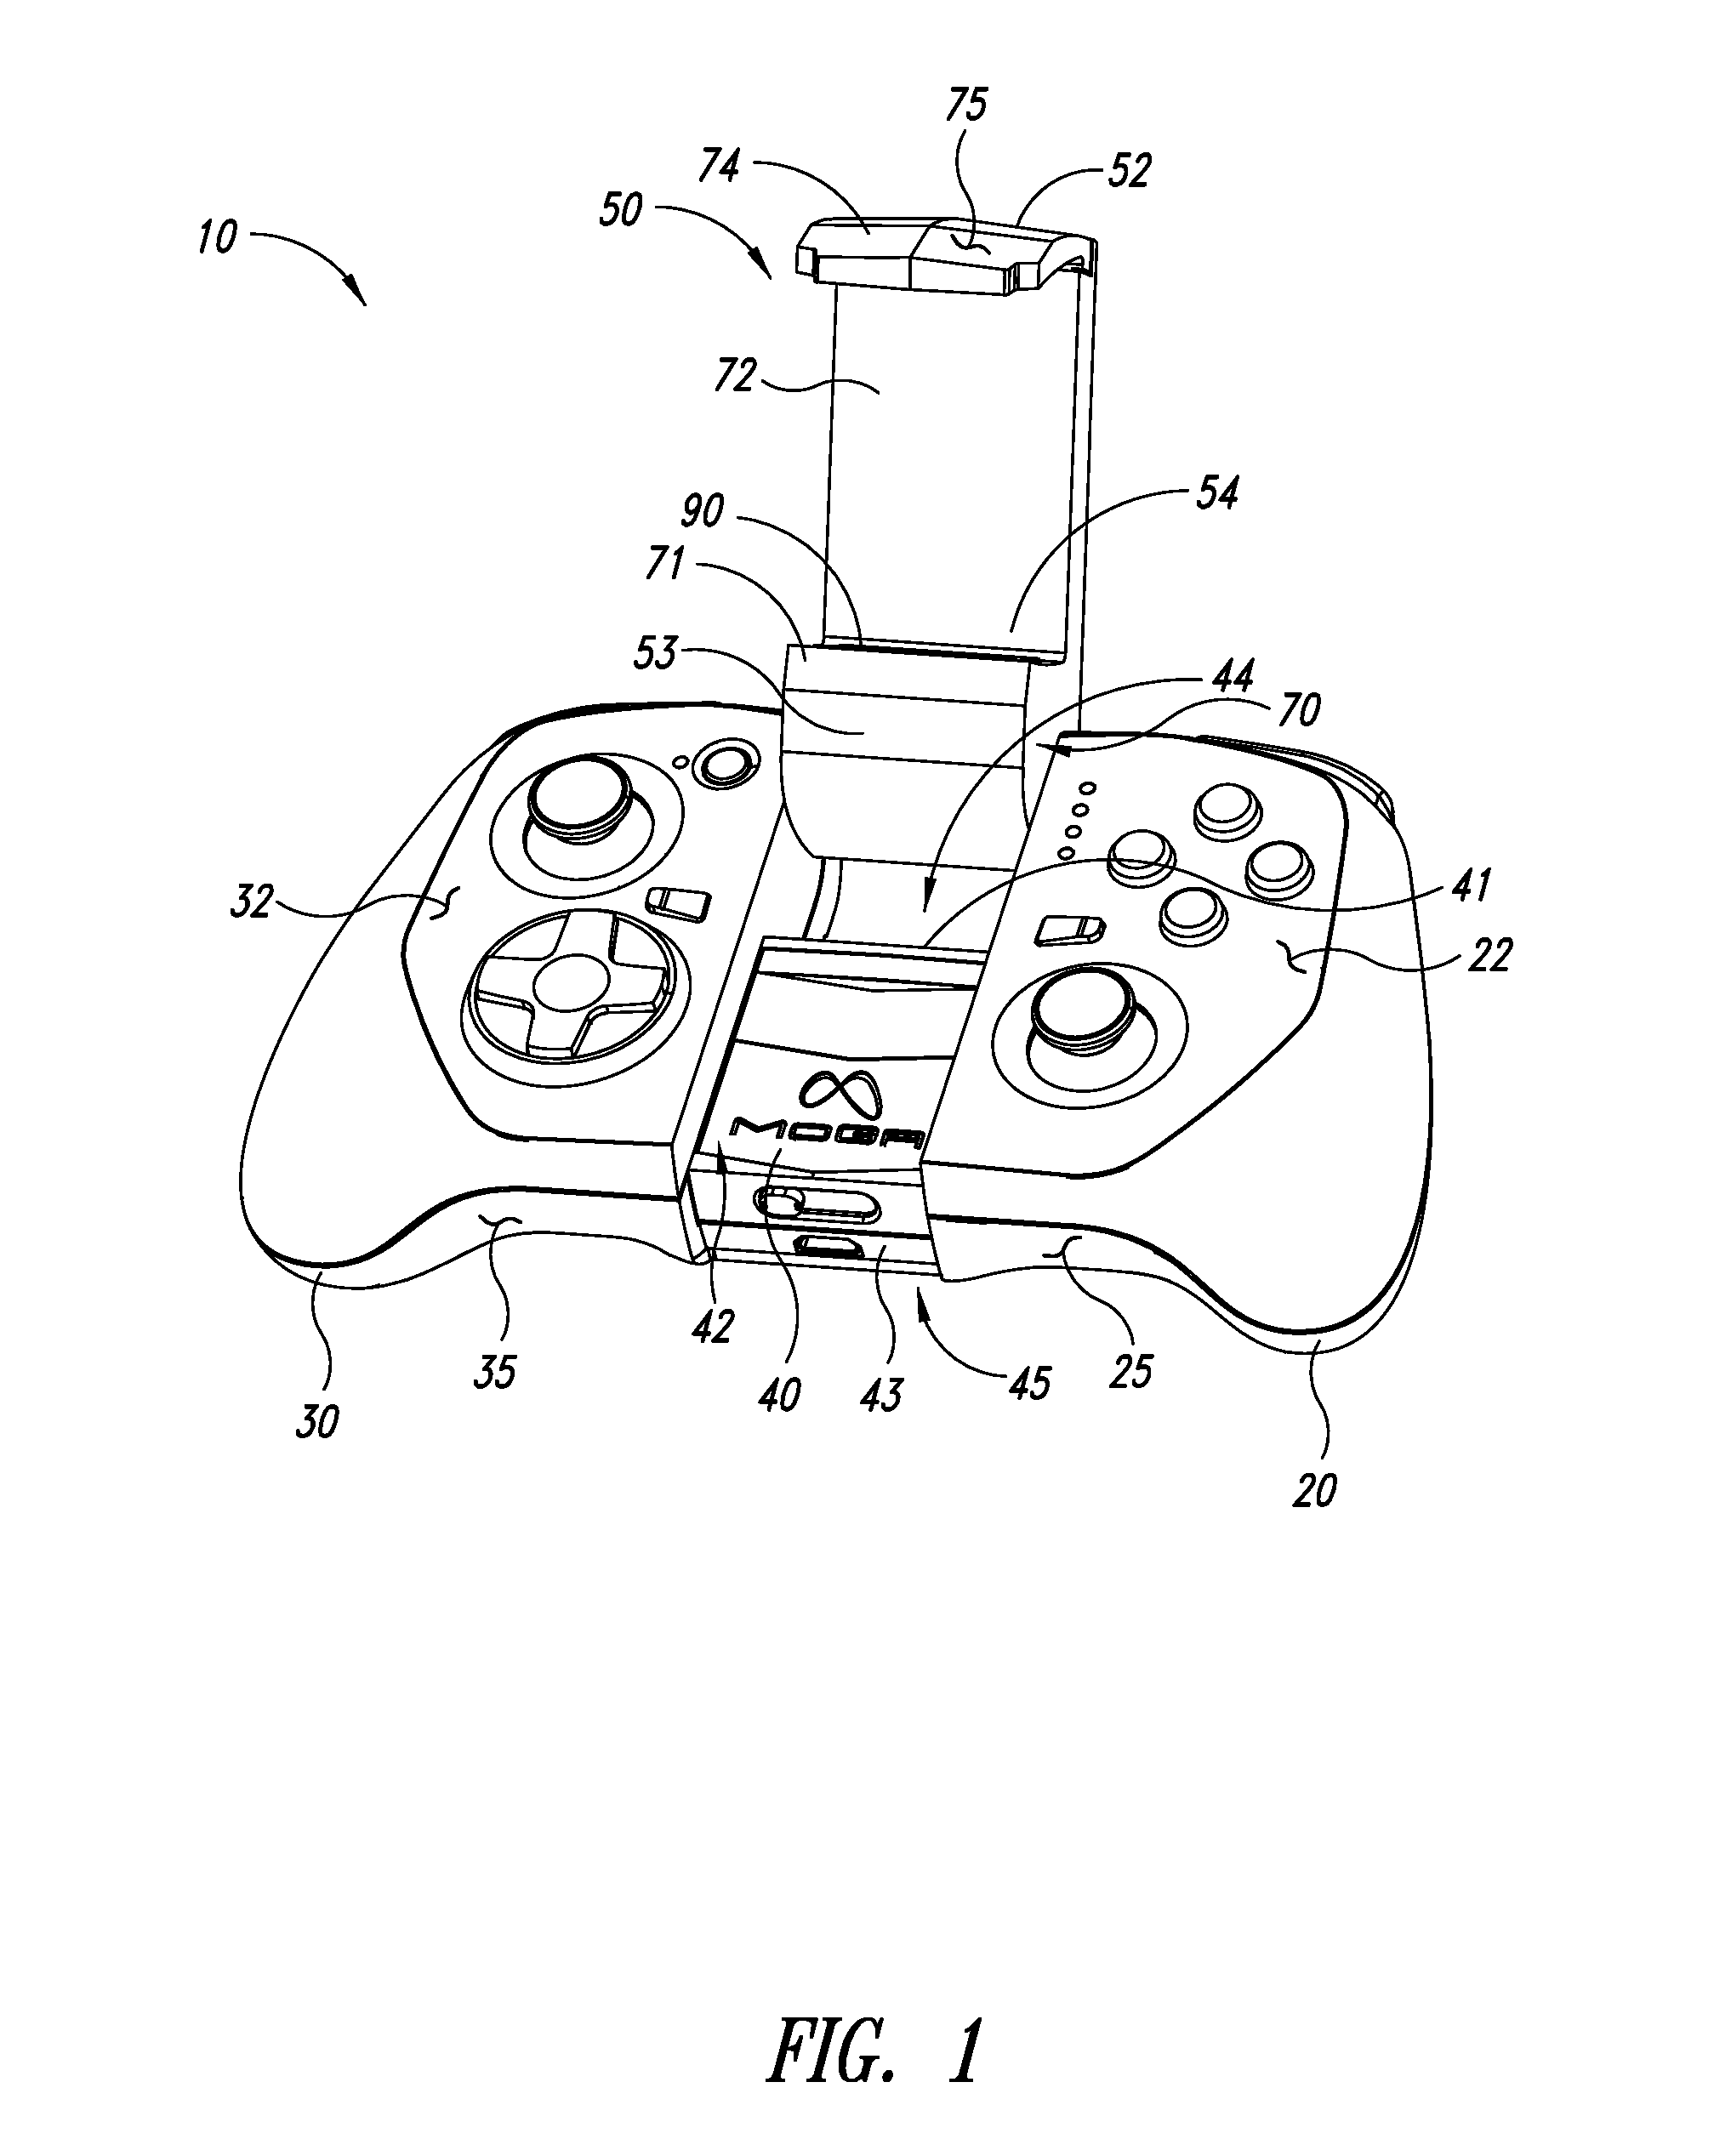 Controllers for use with mobile devices